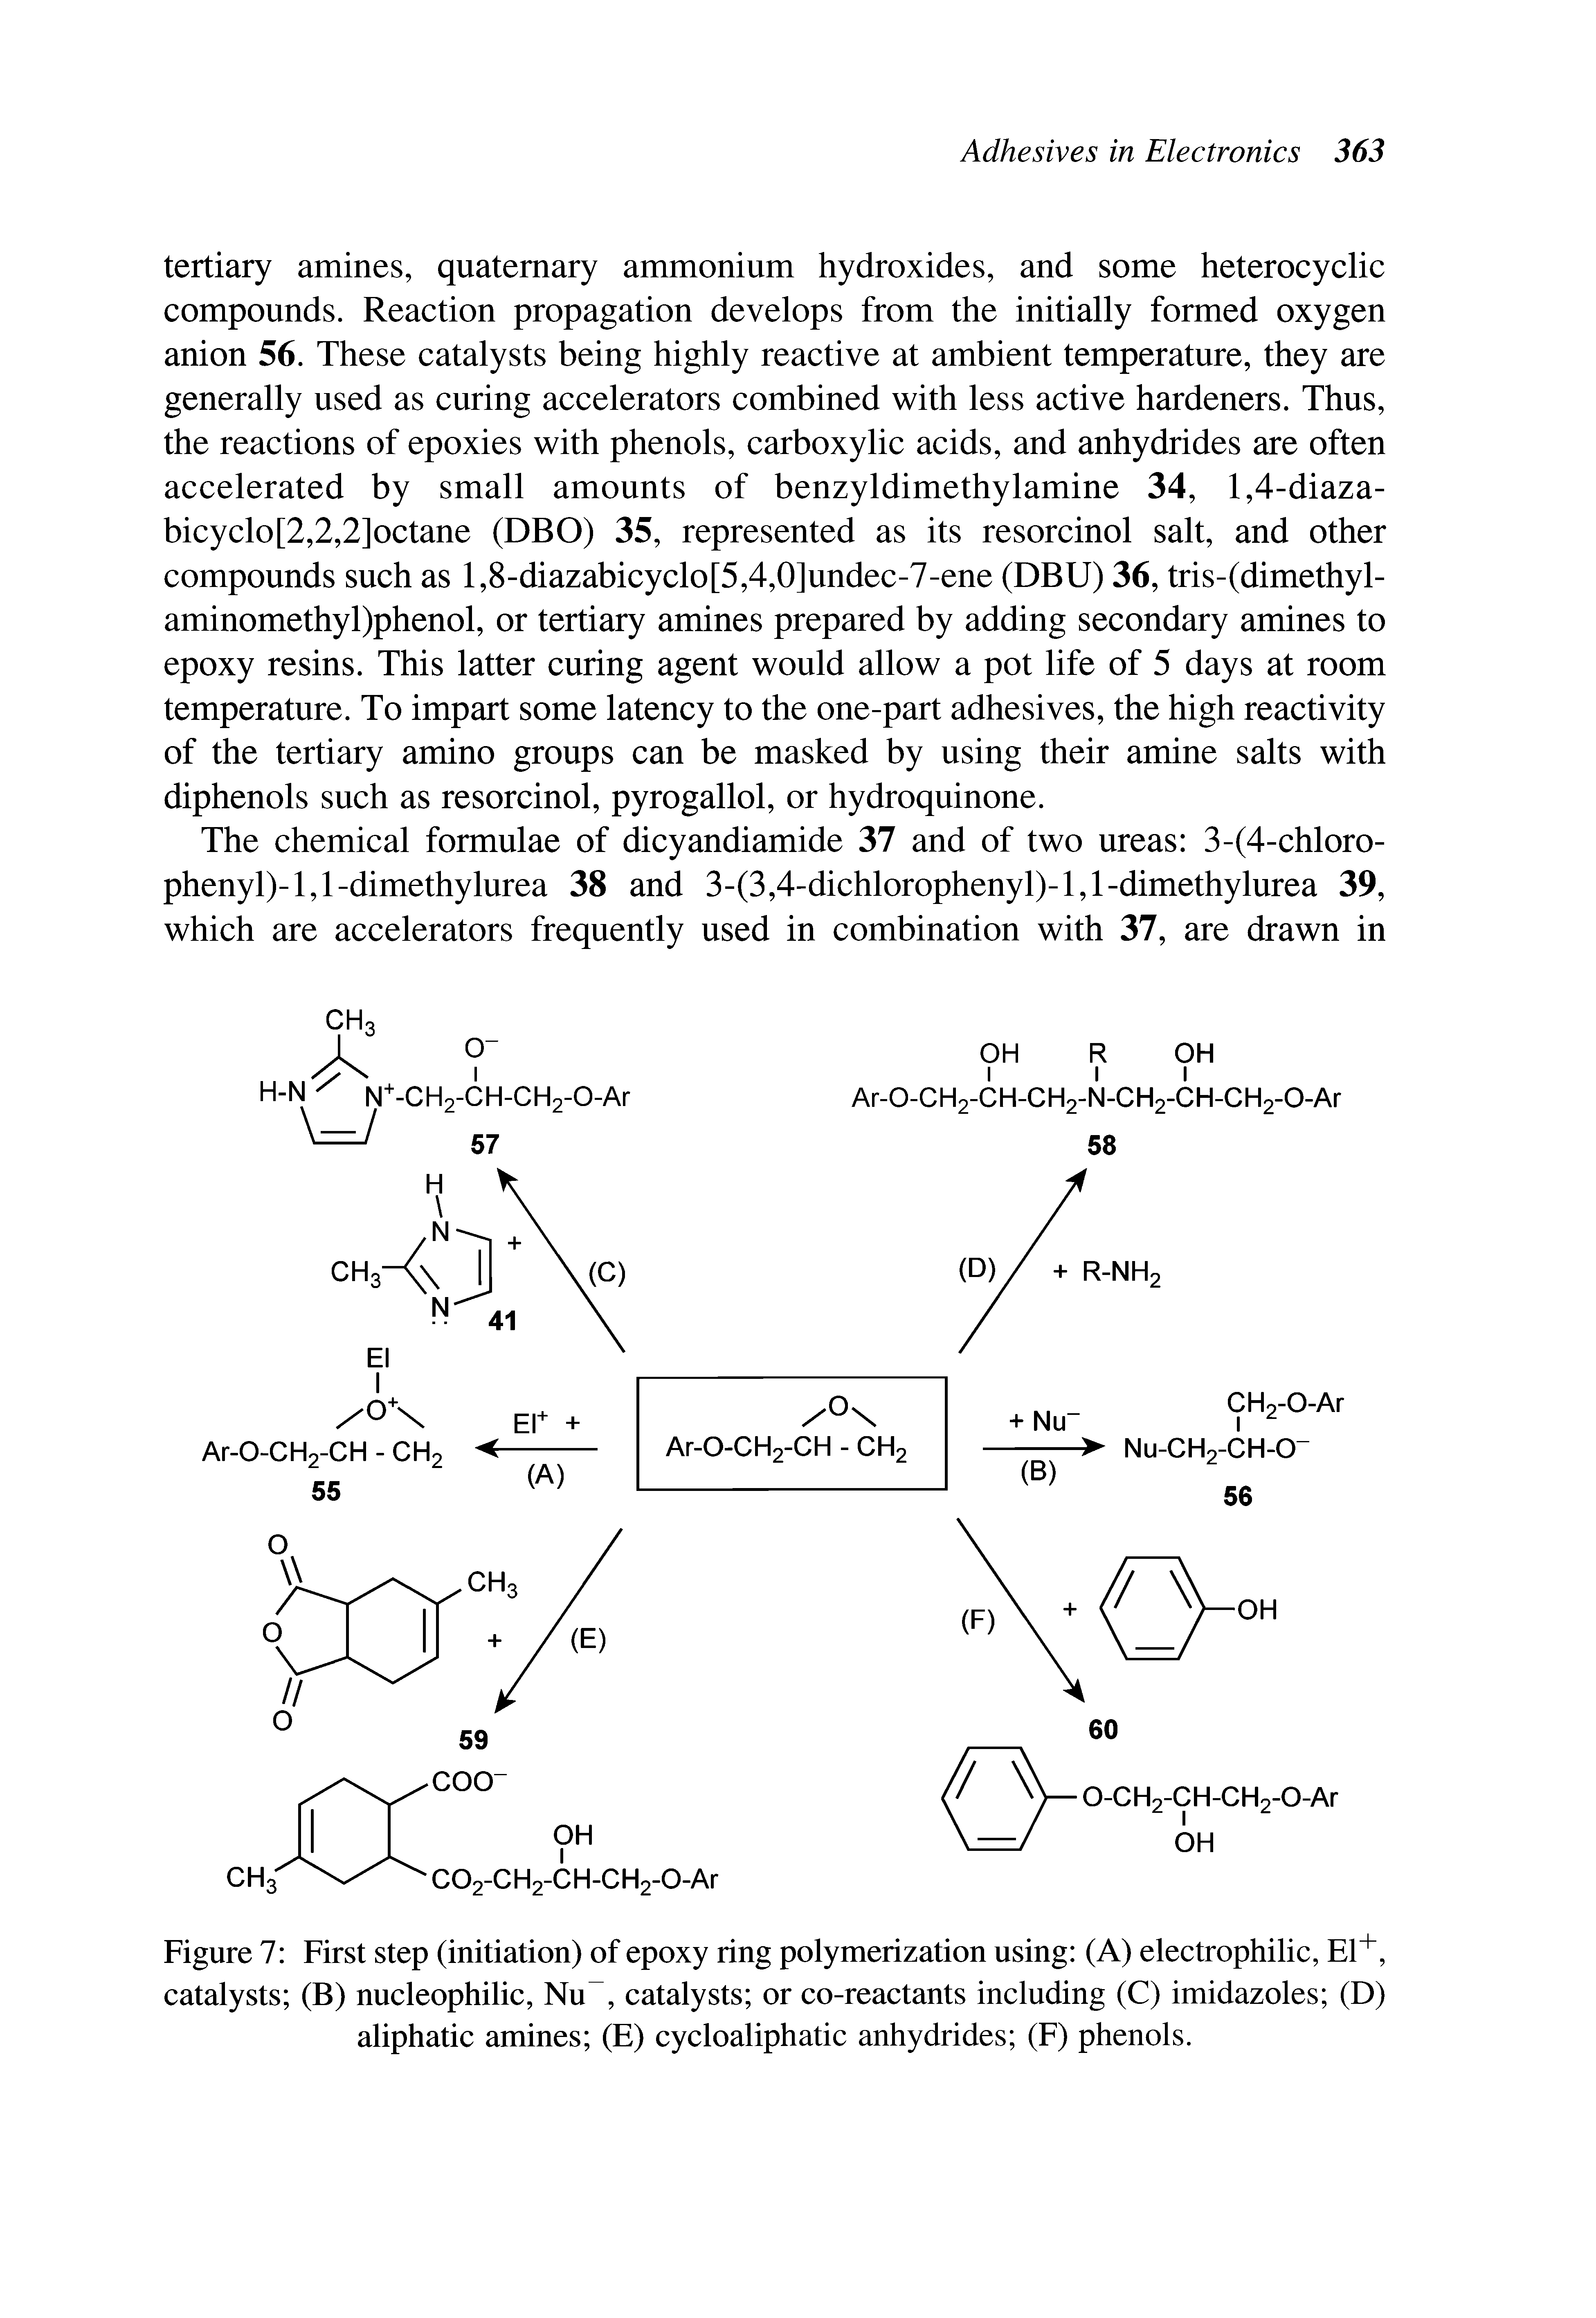 Figure 7 First step (initiation) of epoxy ring polymerization using (A) electrophilic, El , catalysts (B) nucleophilic, Nu, catalysts or co-reactants including (C) imidazoles (D) aliphatic amines (E) cycloaliphatic anhydrides (F) phenols.